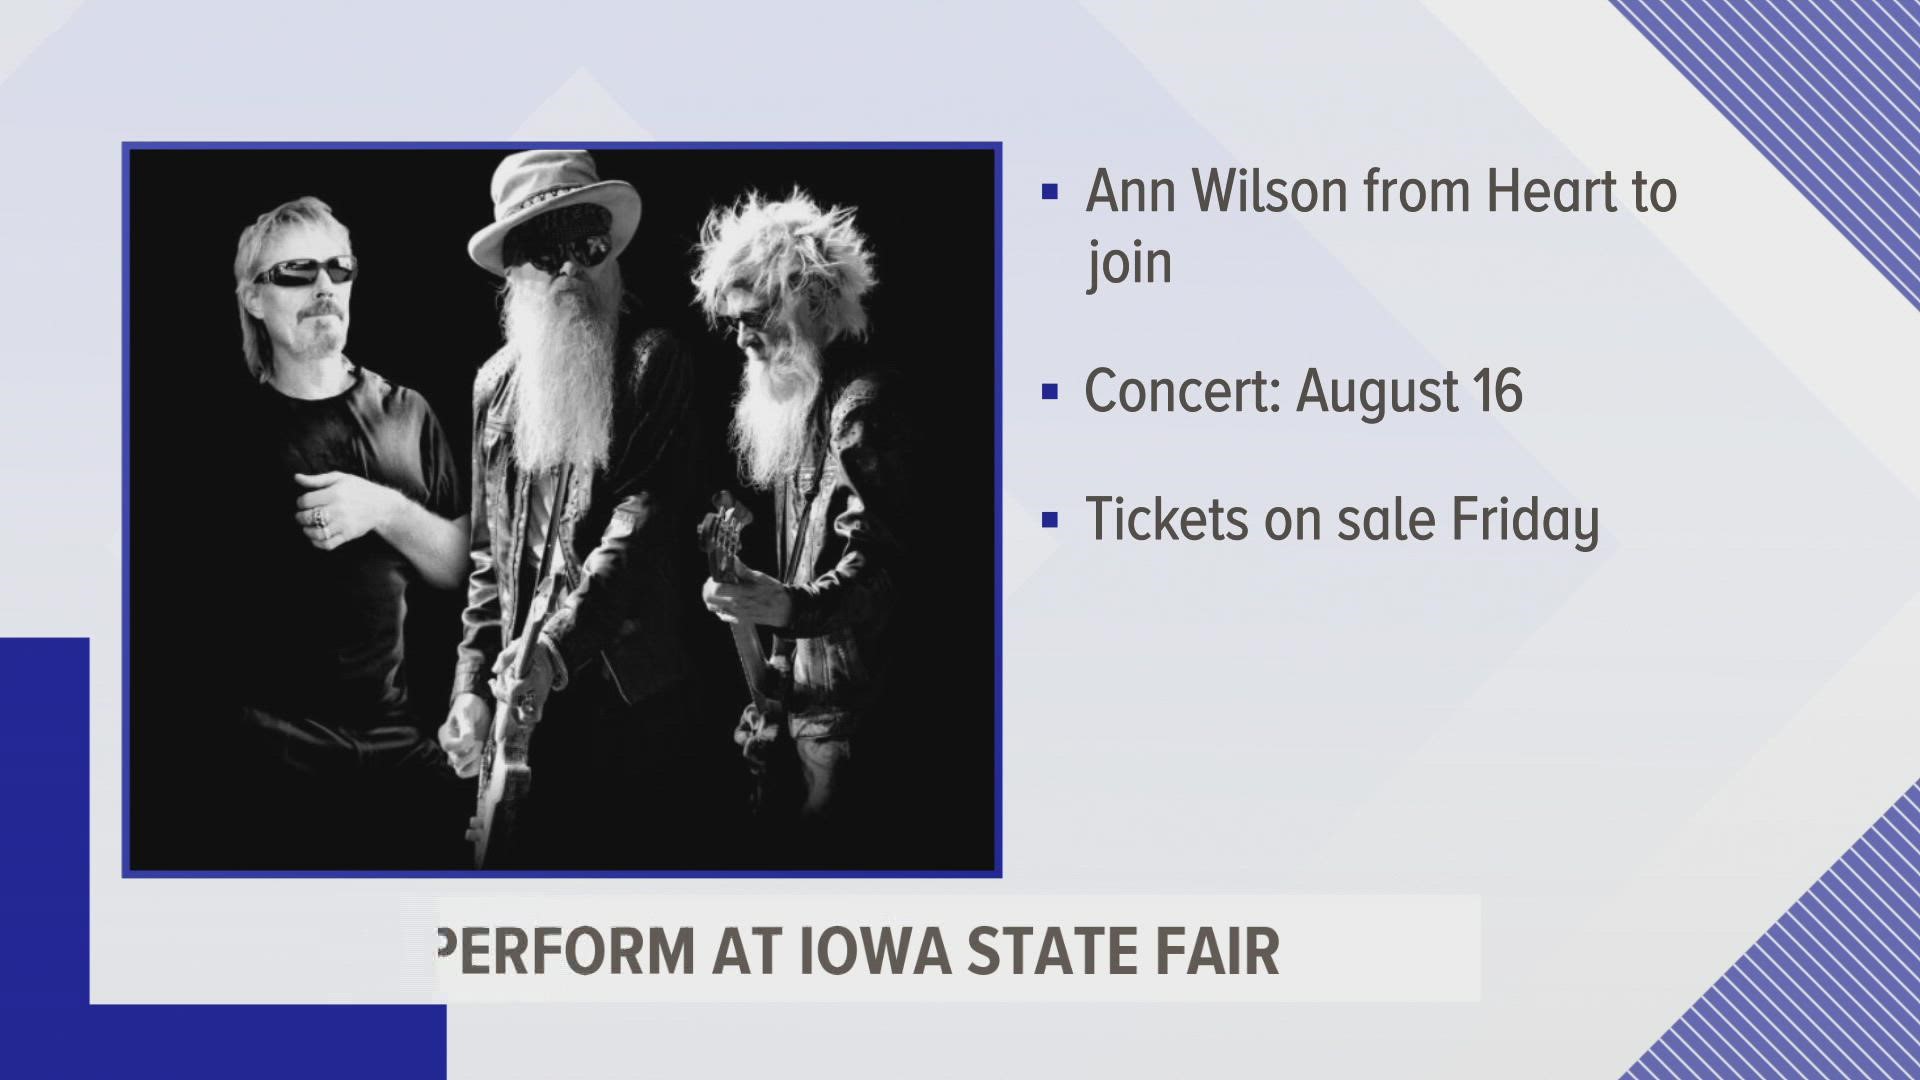 The Hall-of-Fame classic rock band and legendary singer will be taking the stage on Tuesday, August 16.